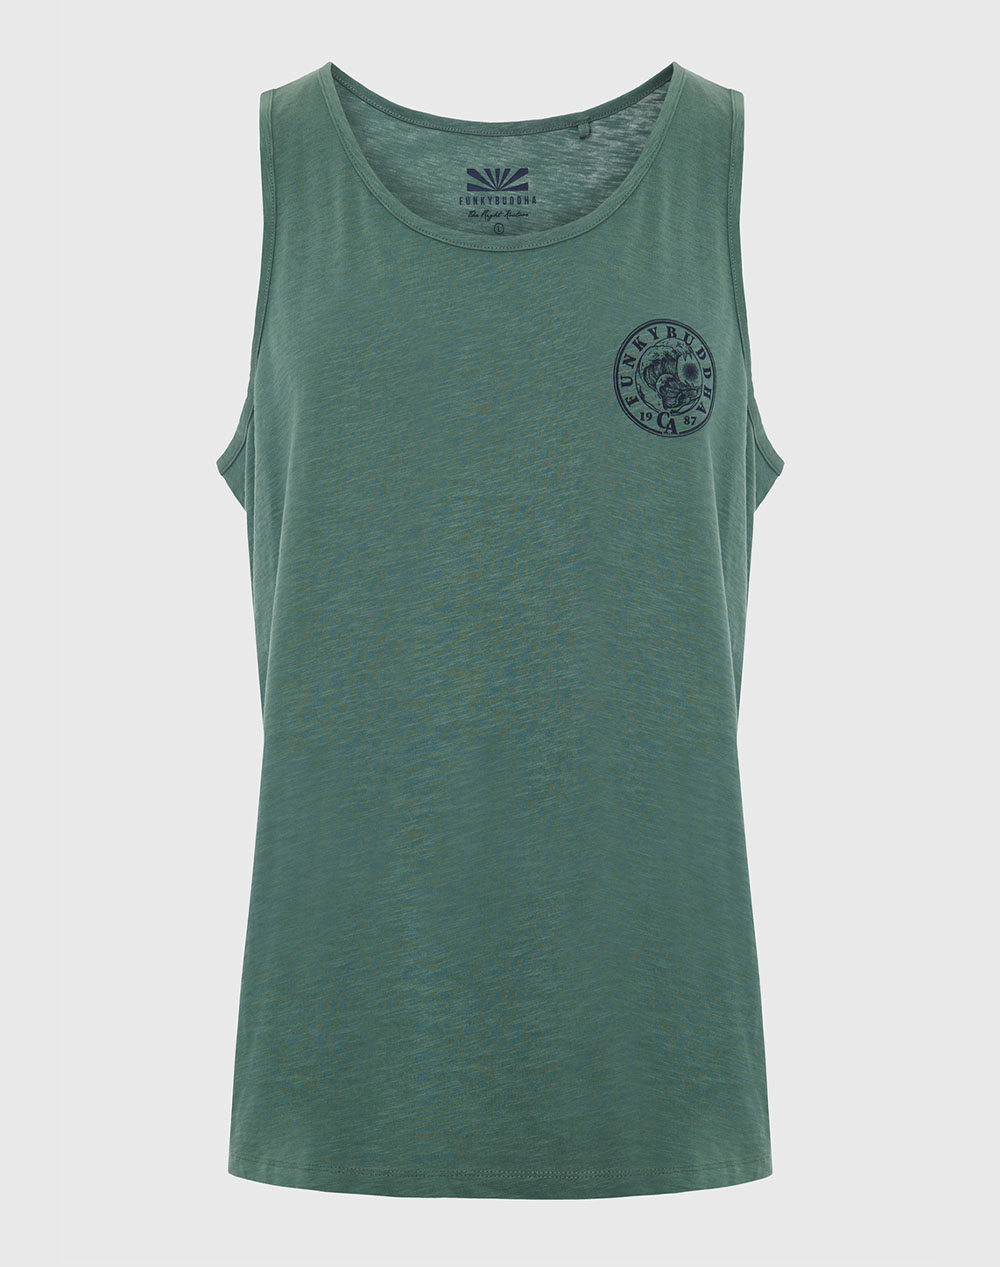 Chest printed mens tank top